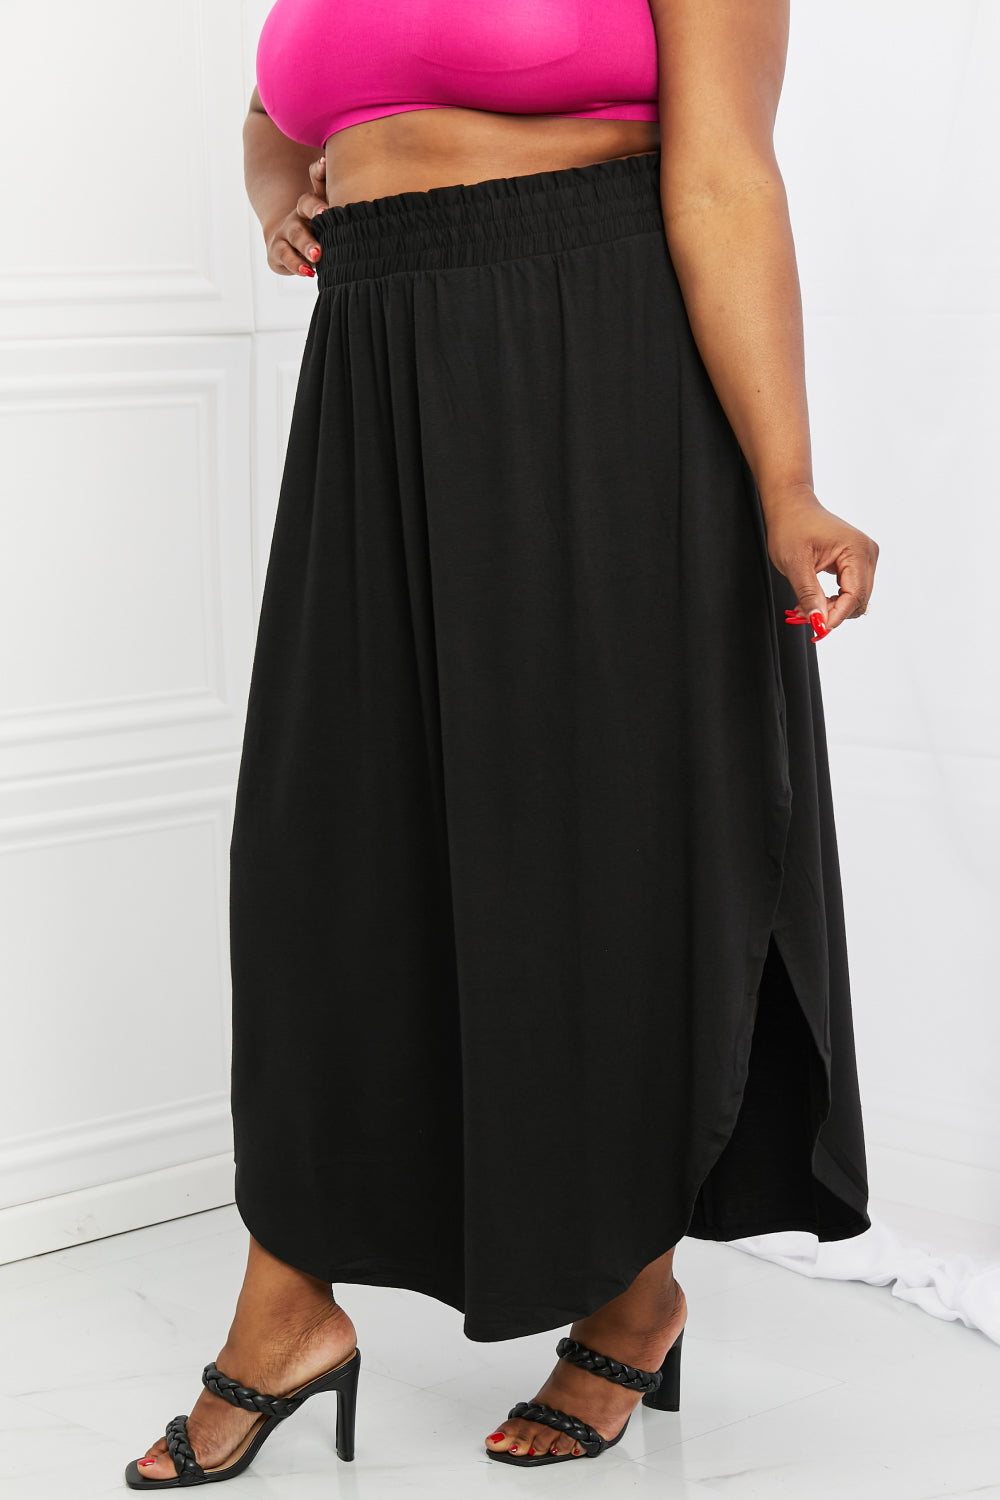 Zenana It's My Time Full Size Side Scoop Scrunch Skirt in Black free shipping -Oh Em Gee Boutique